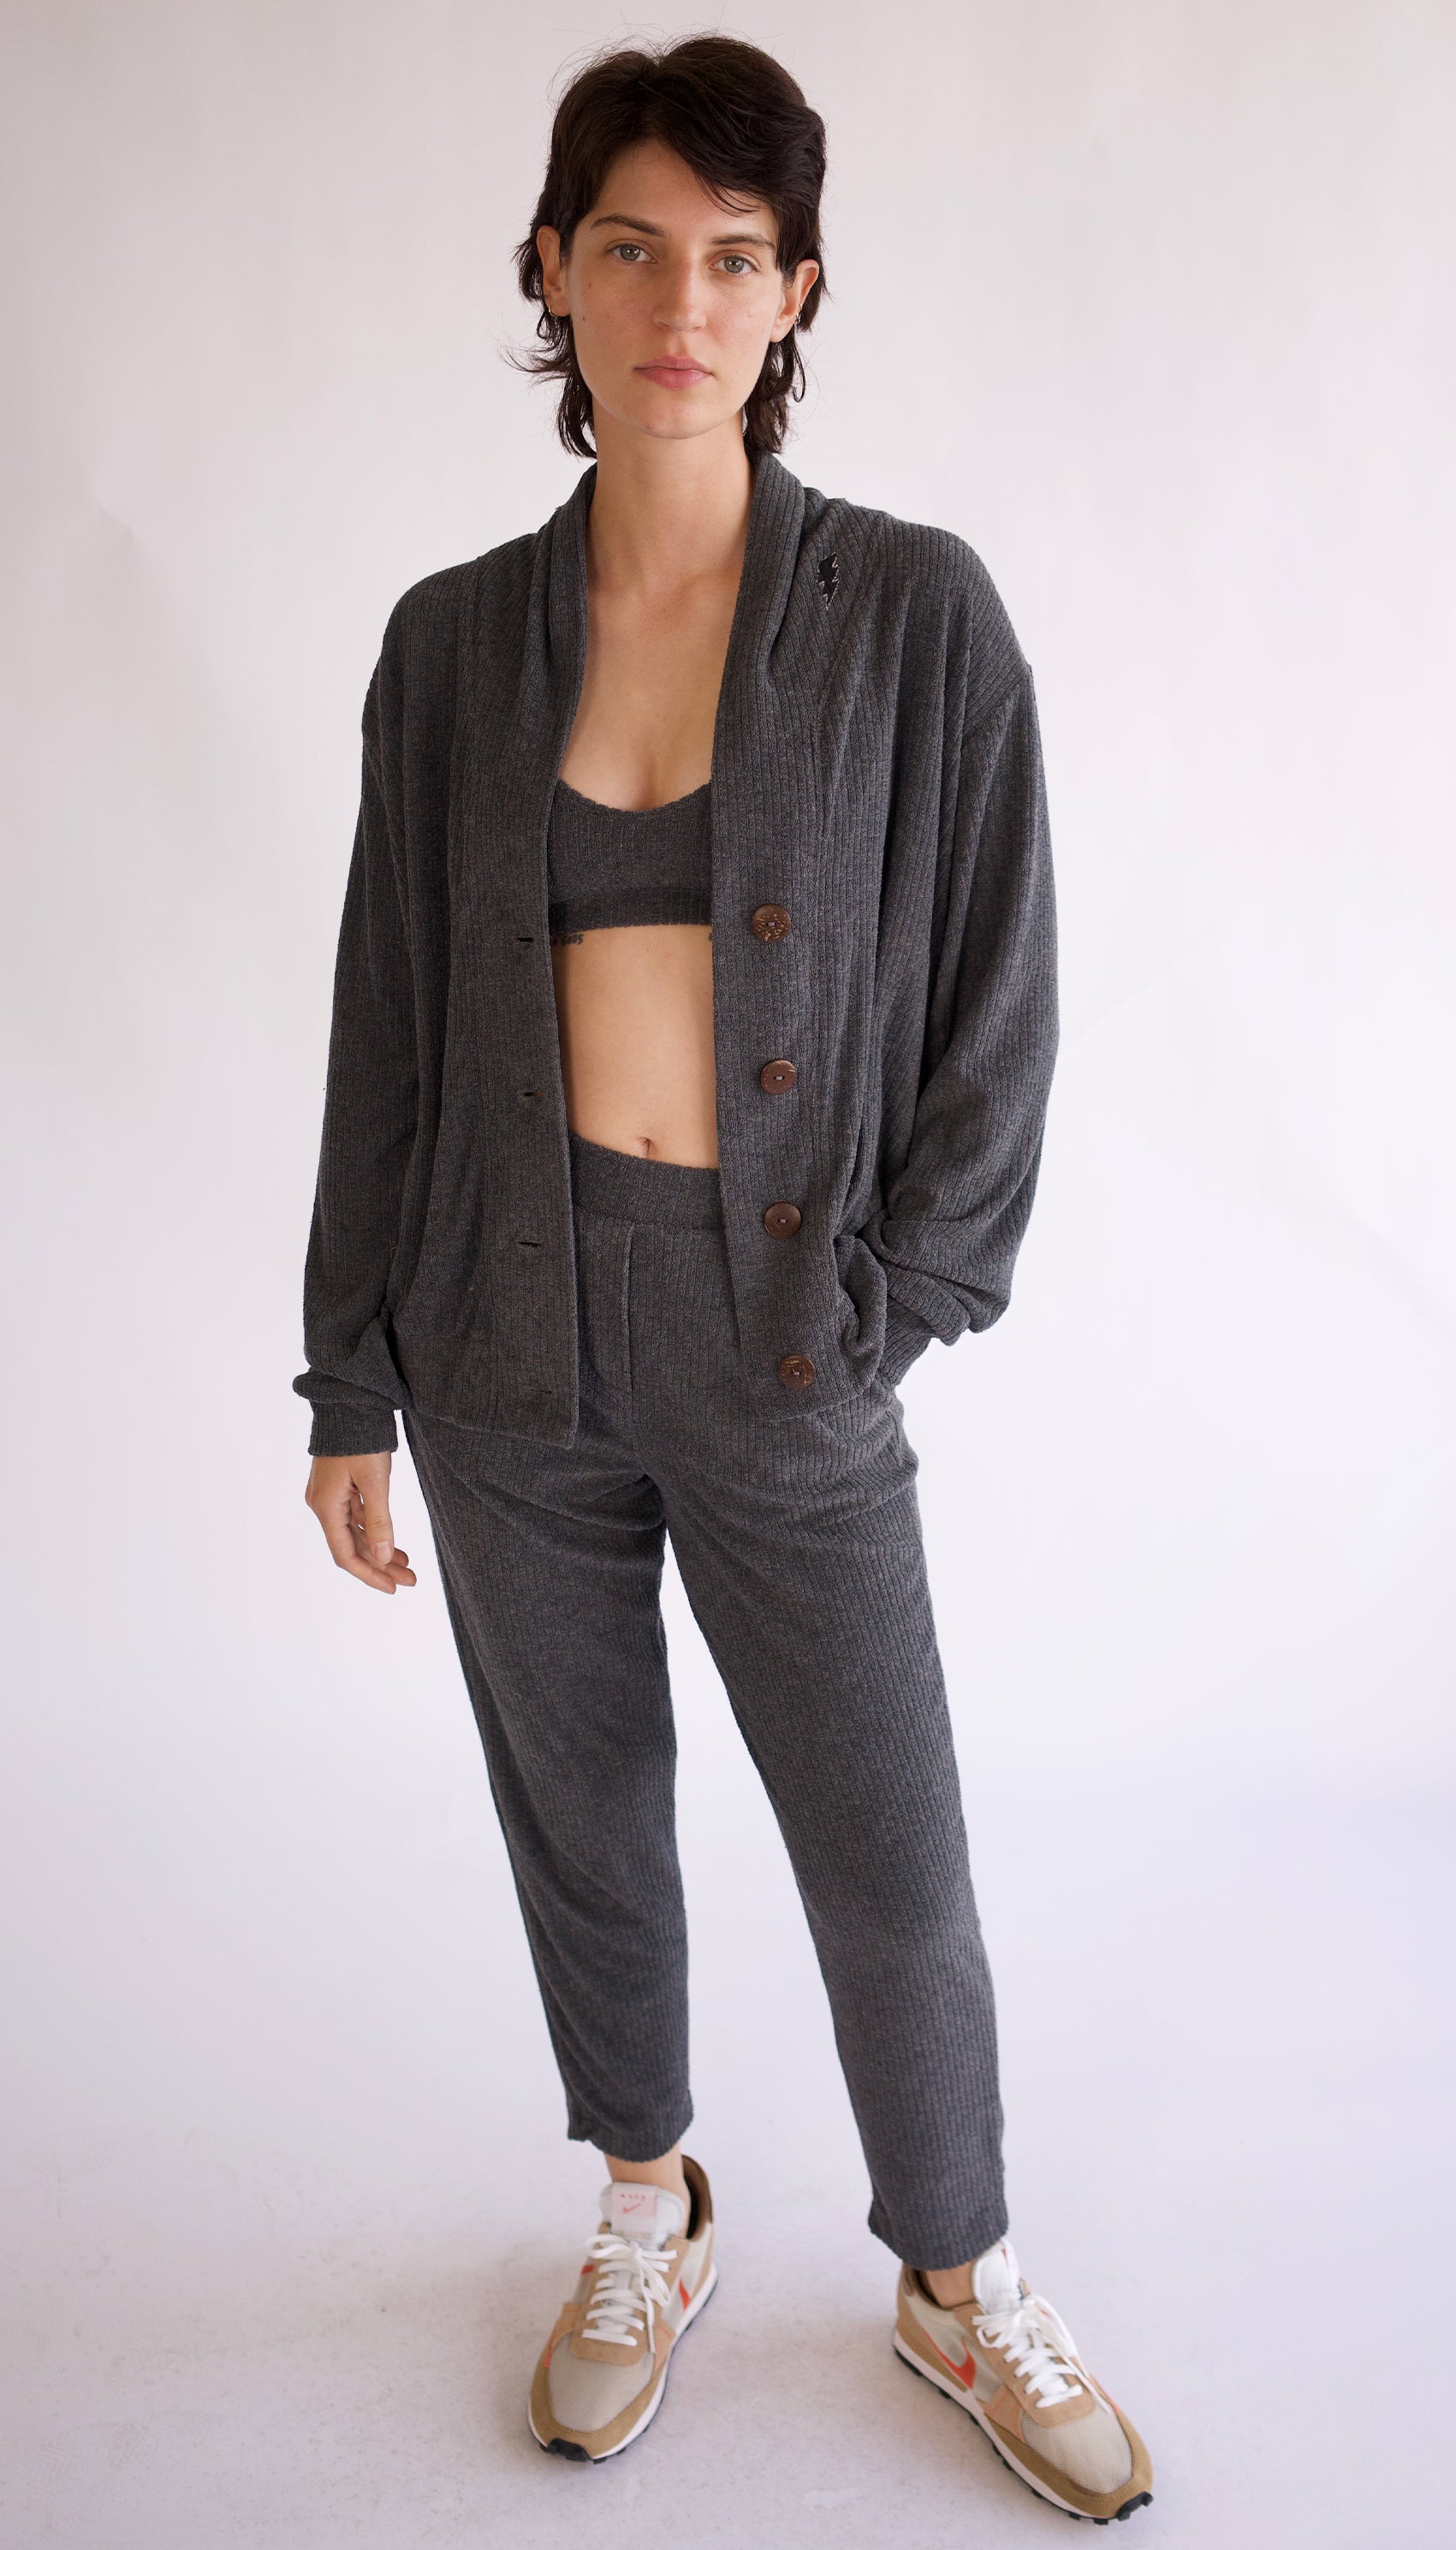 70’s inspired terry drop needle rib cardigan, charcoal dyed in small batches of 4 pieces at a time, each piece is unique. Chic yet uber comfy!